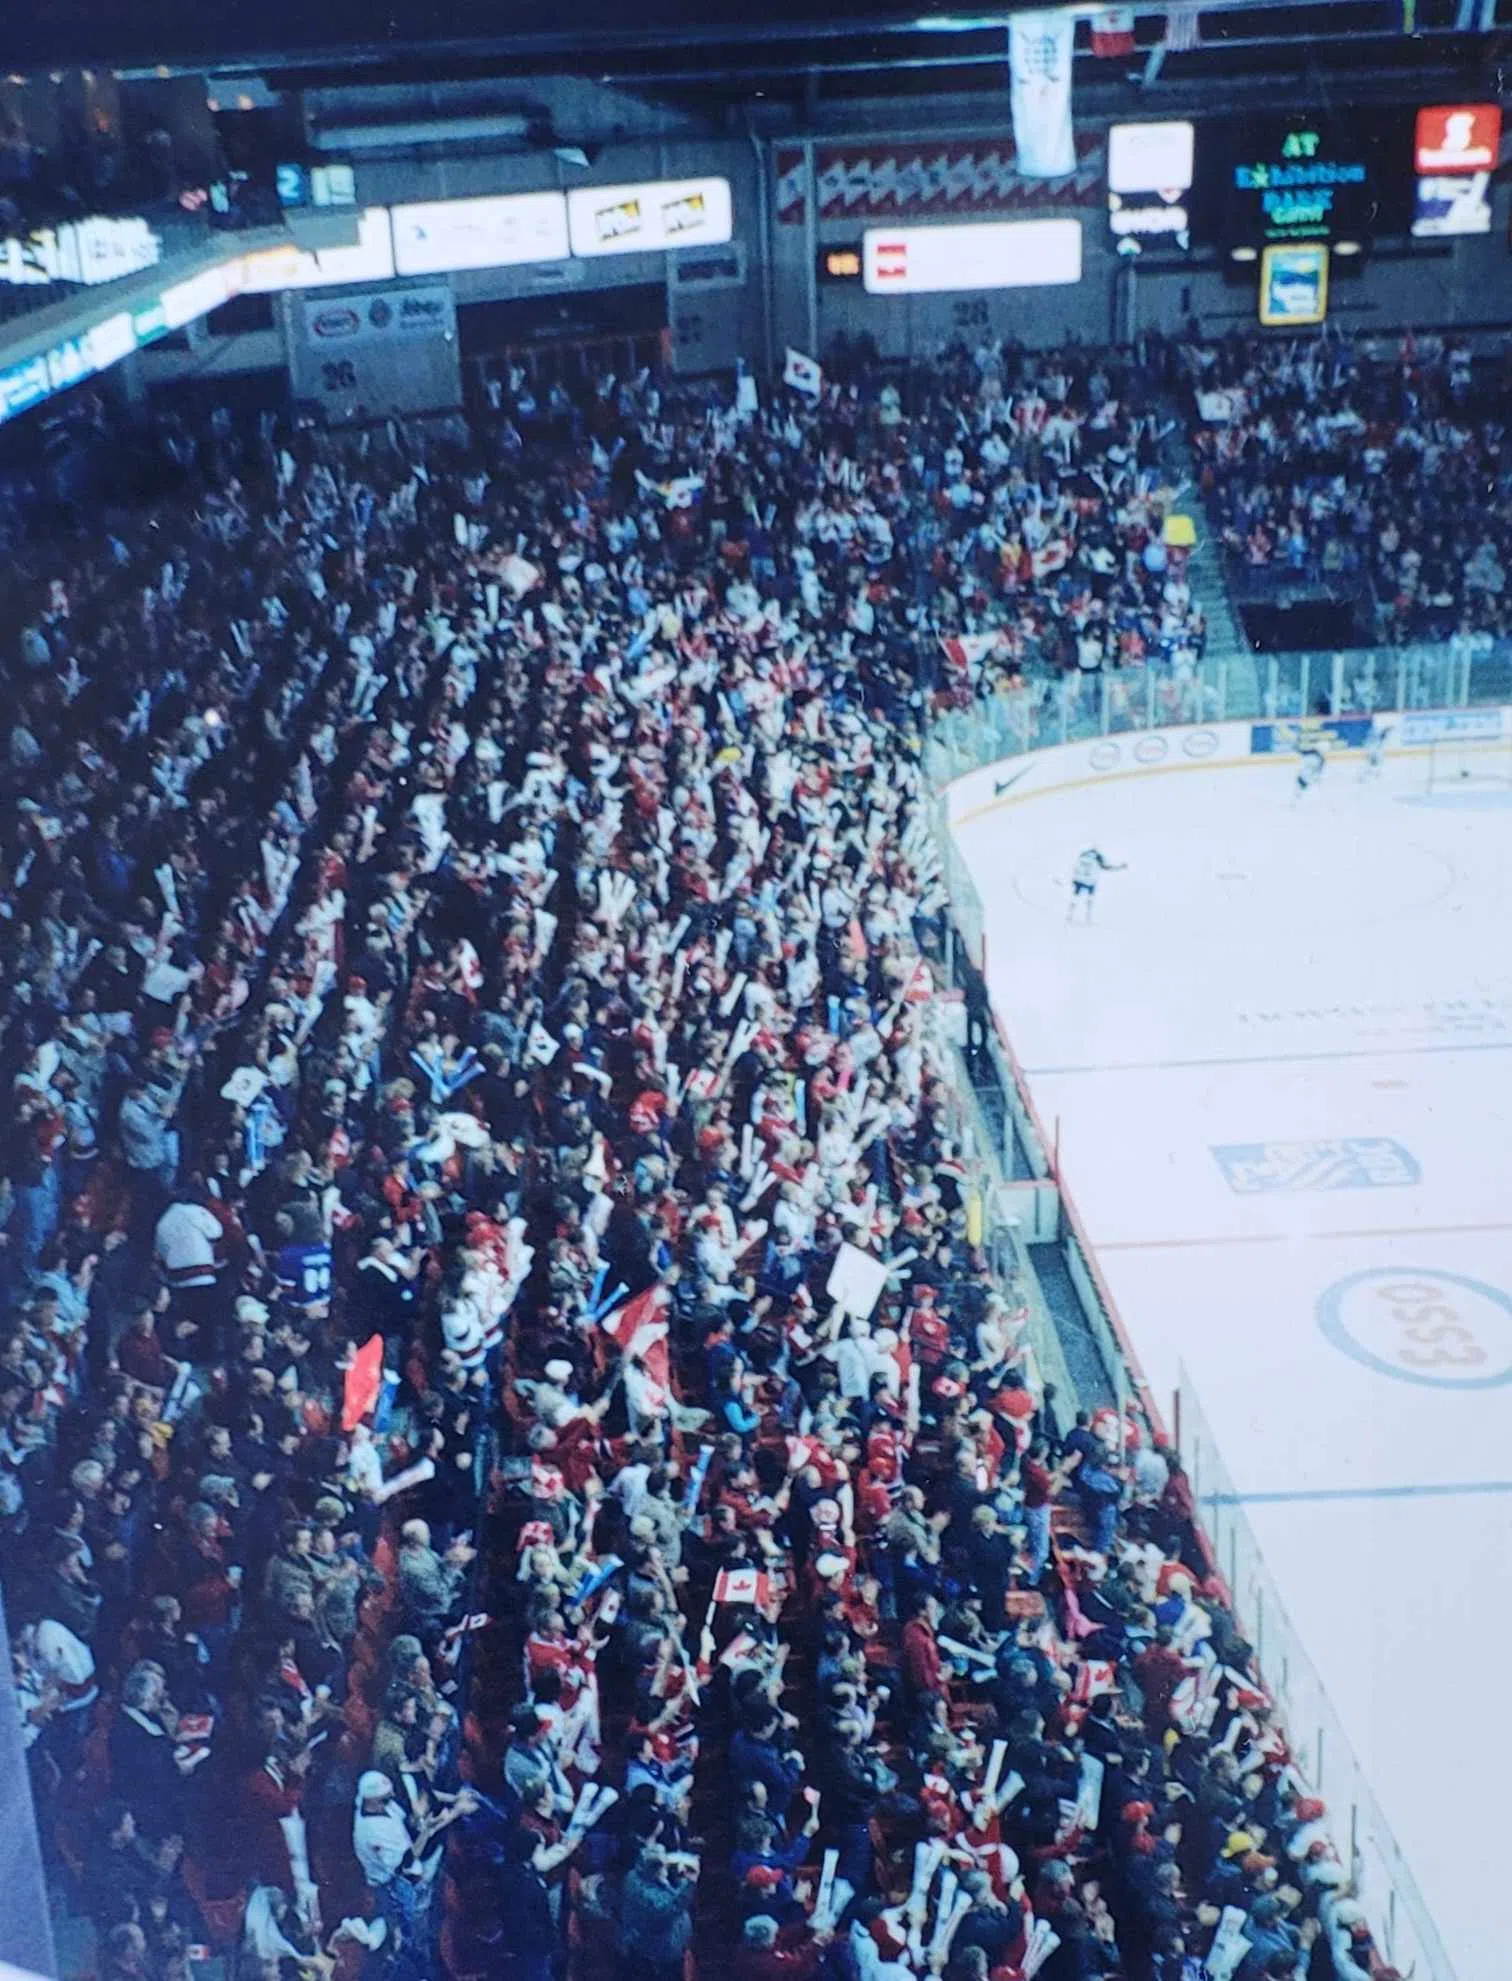 20 Years Ago This Week Halifax Hosted the 2004 World Women's Hockey Championship